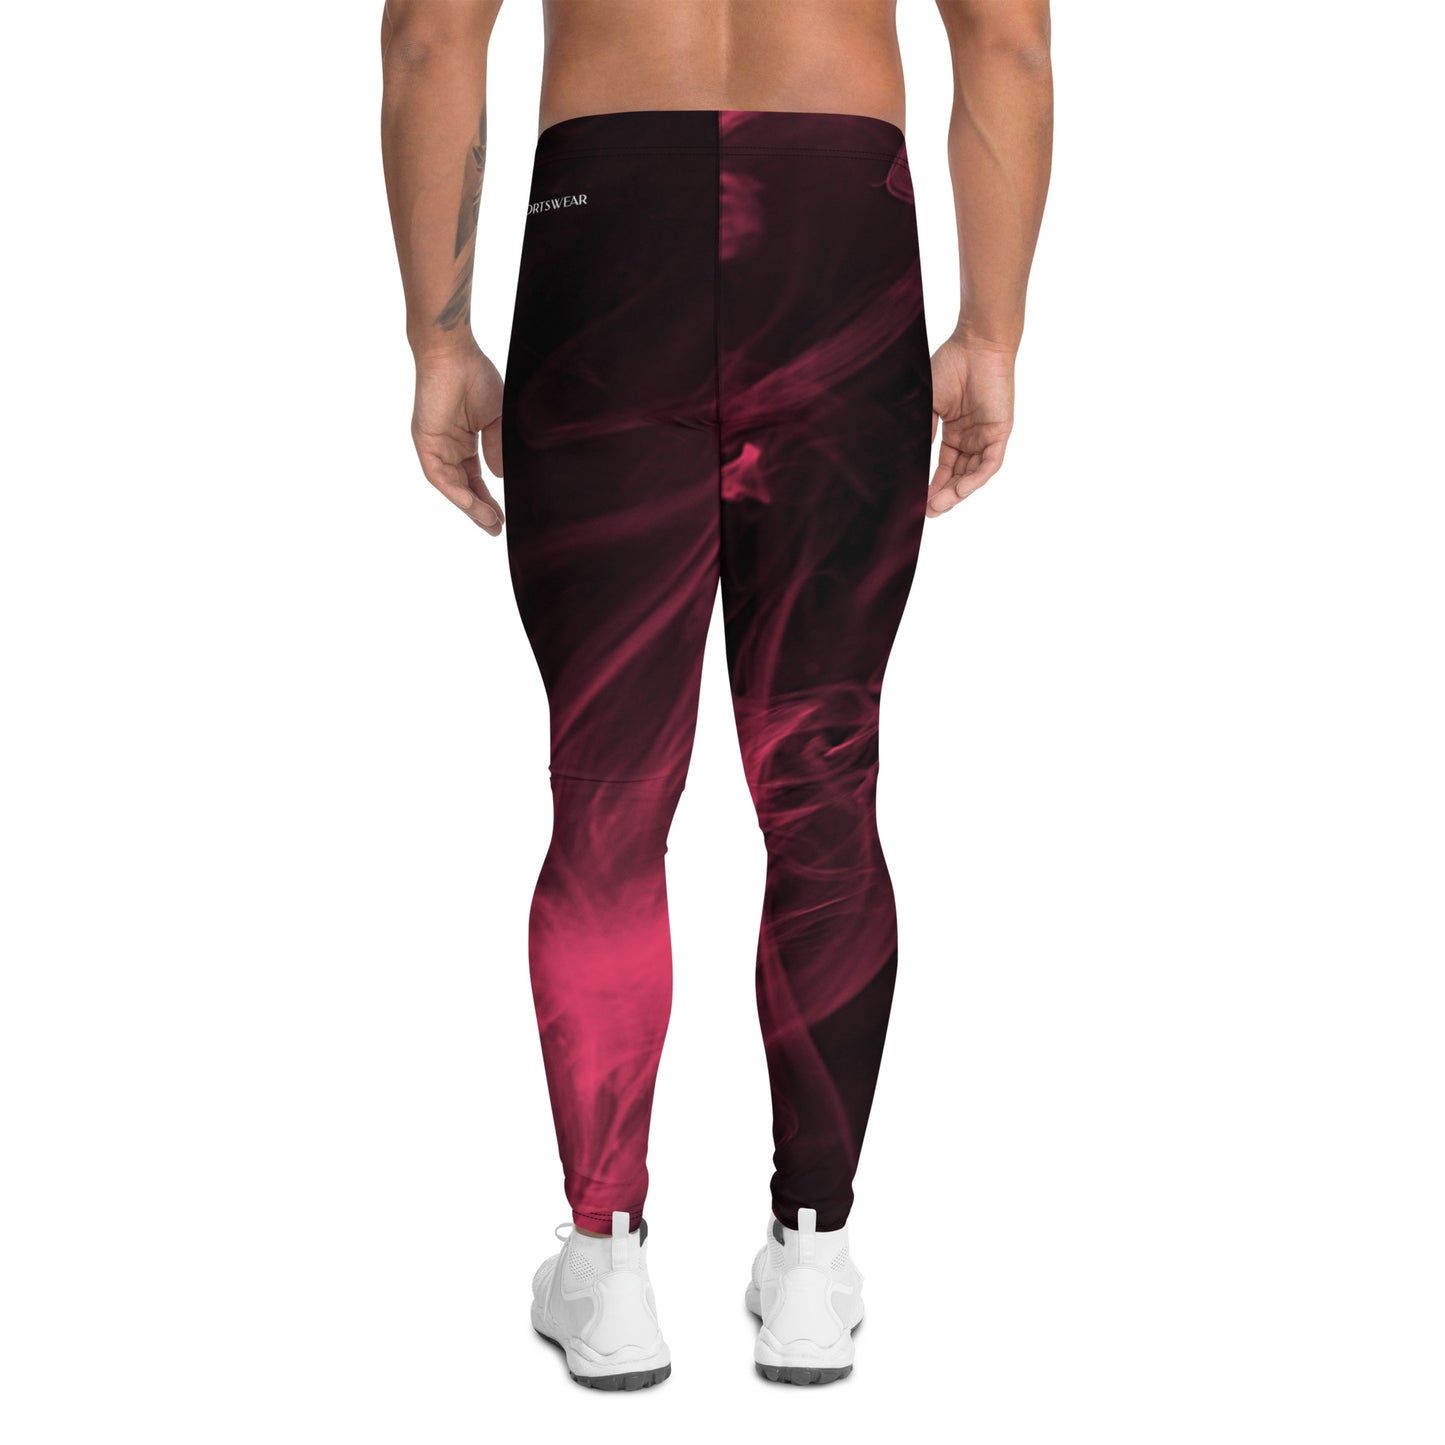 Humble Sportswear, men's color match all-over print activewear performance leggings 